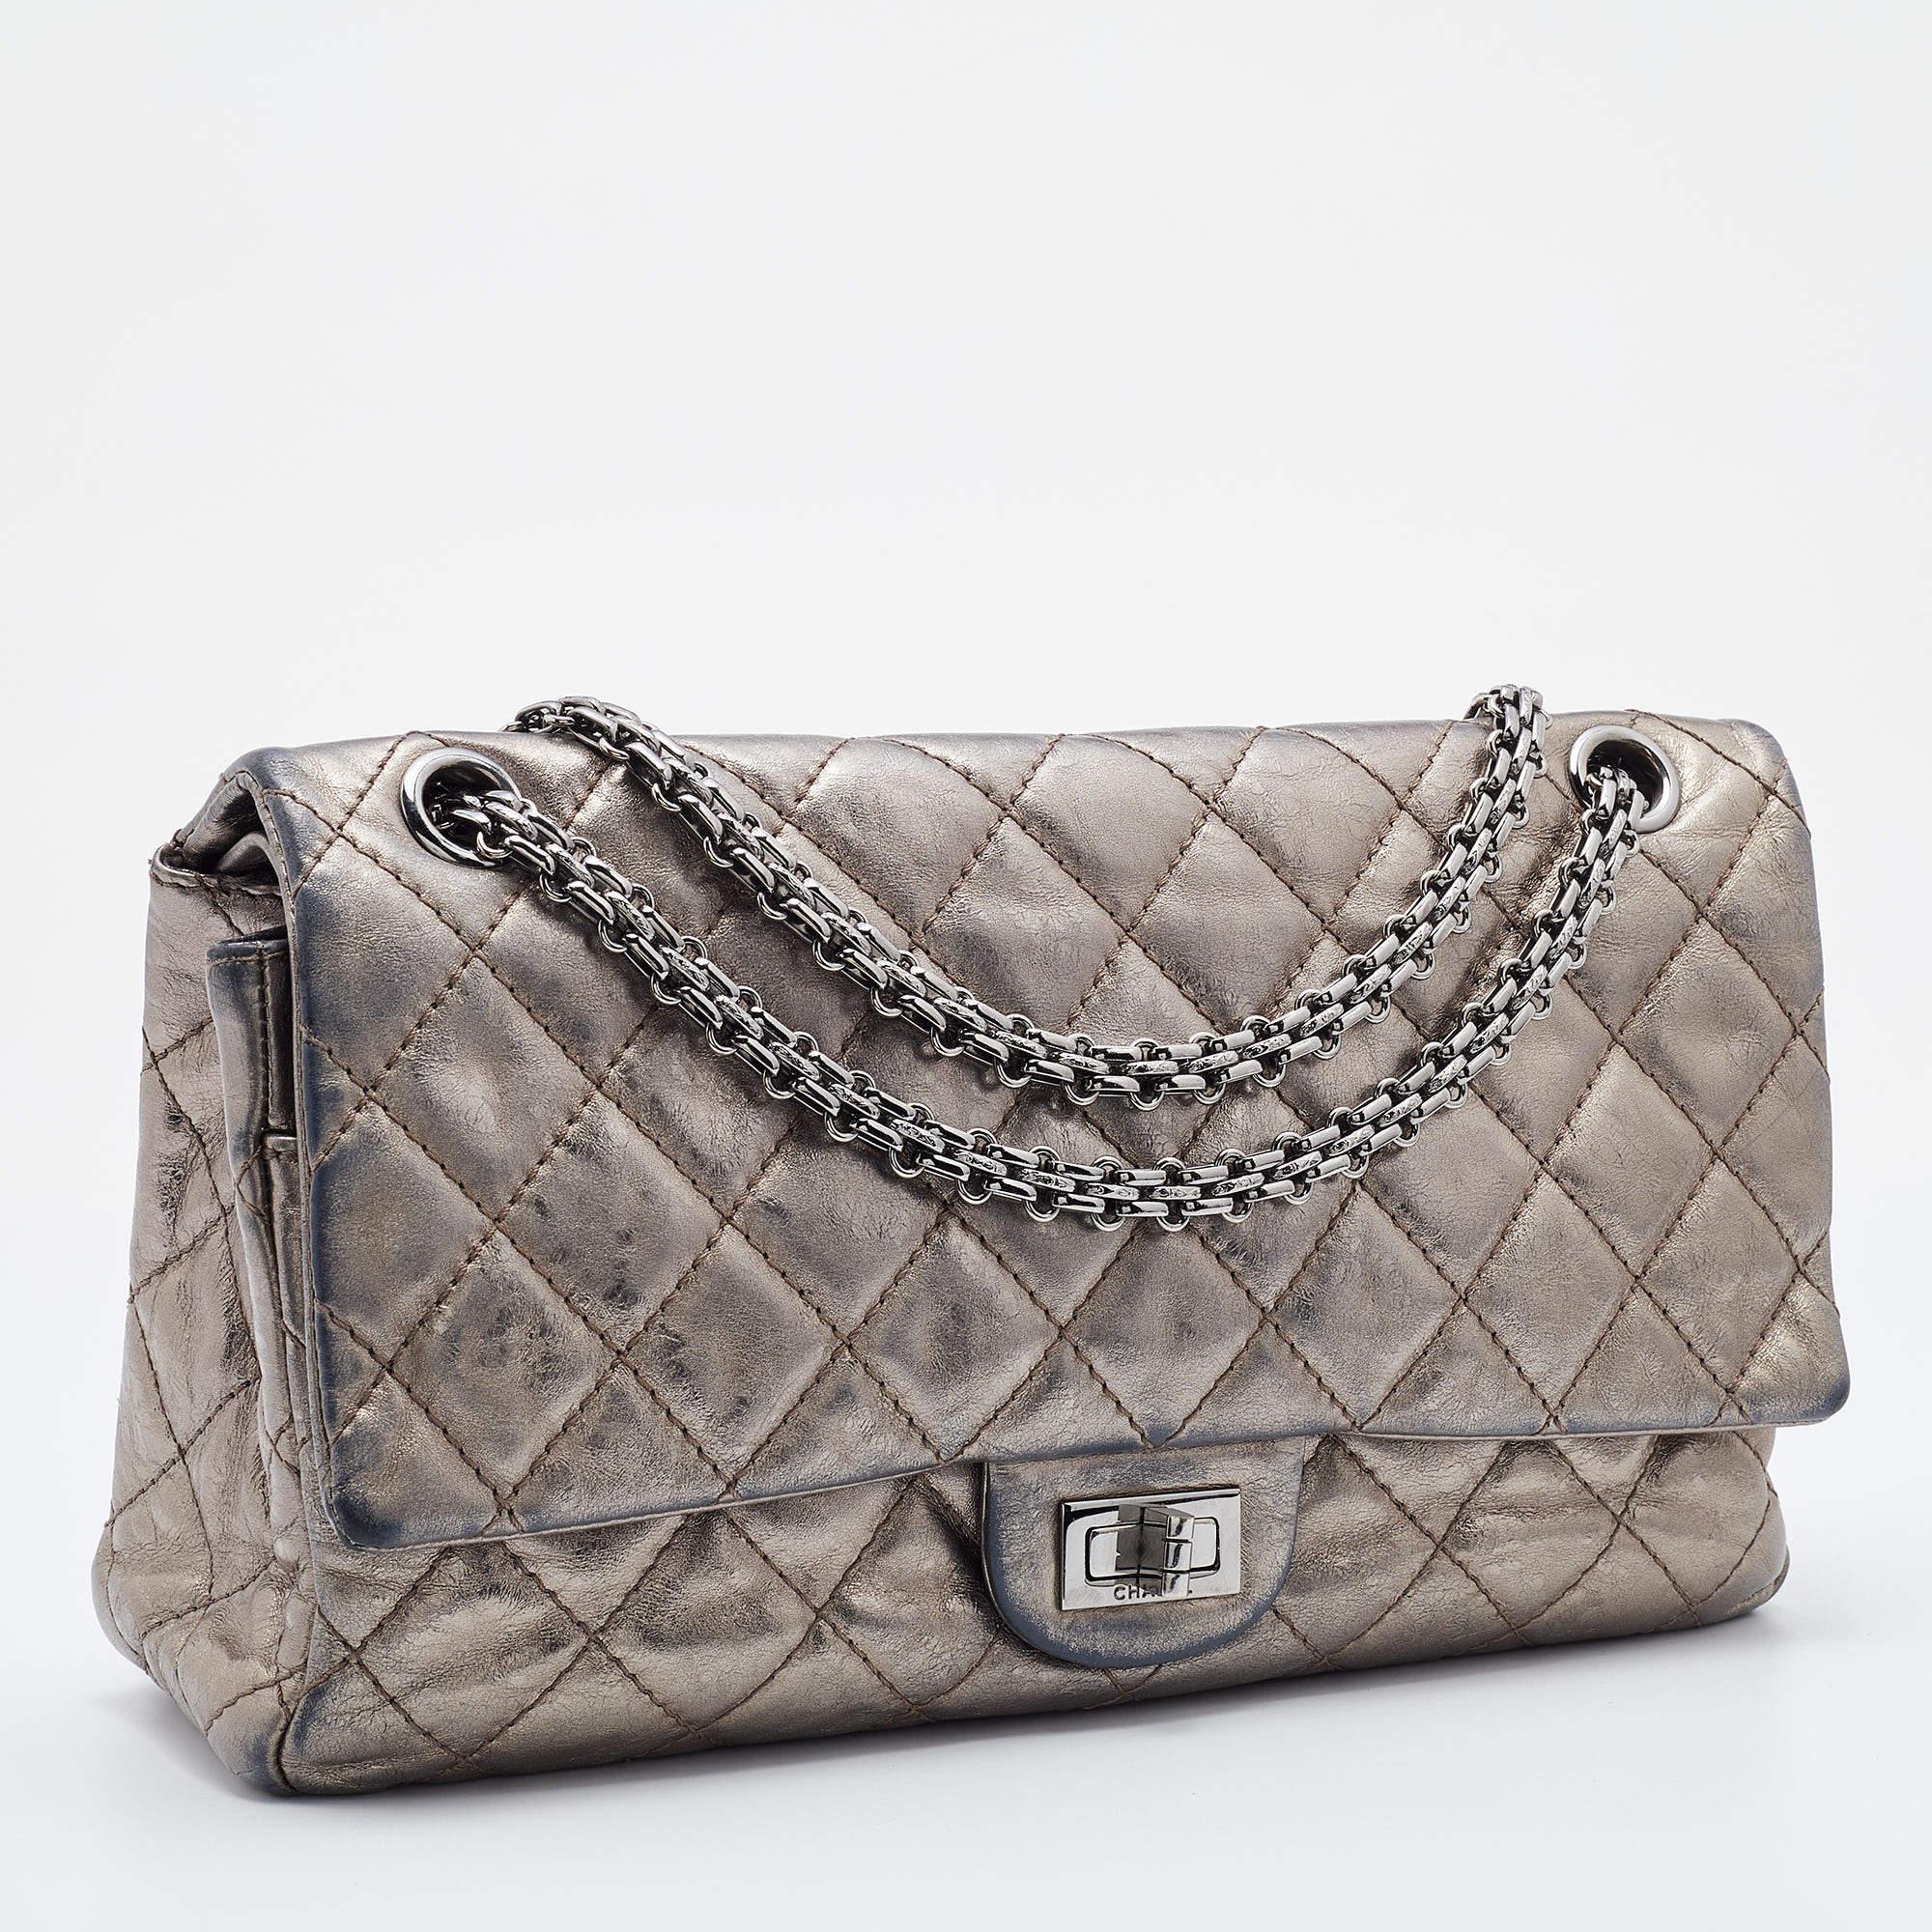 Chanel Metallic Grey Quilted Leather Reissue 2.55 Classic 226 Flap Bag In Fair Condition For Sale In Dubai, Al Qouz 2